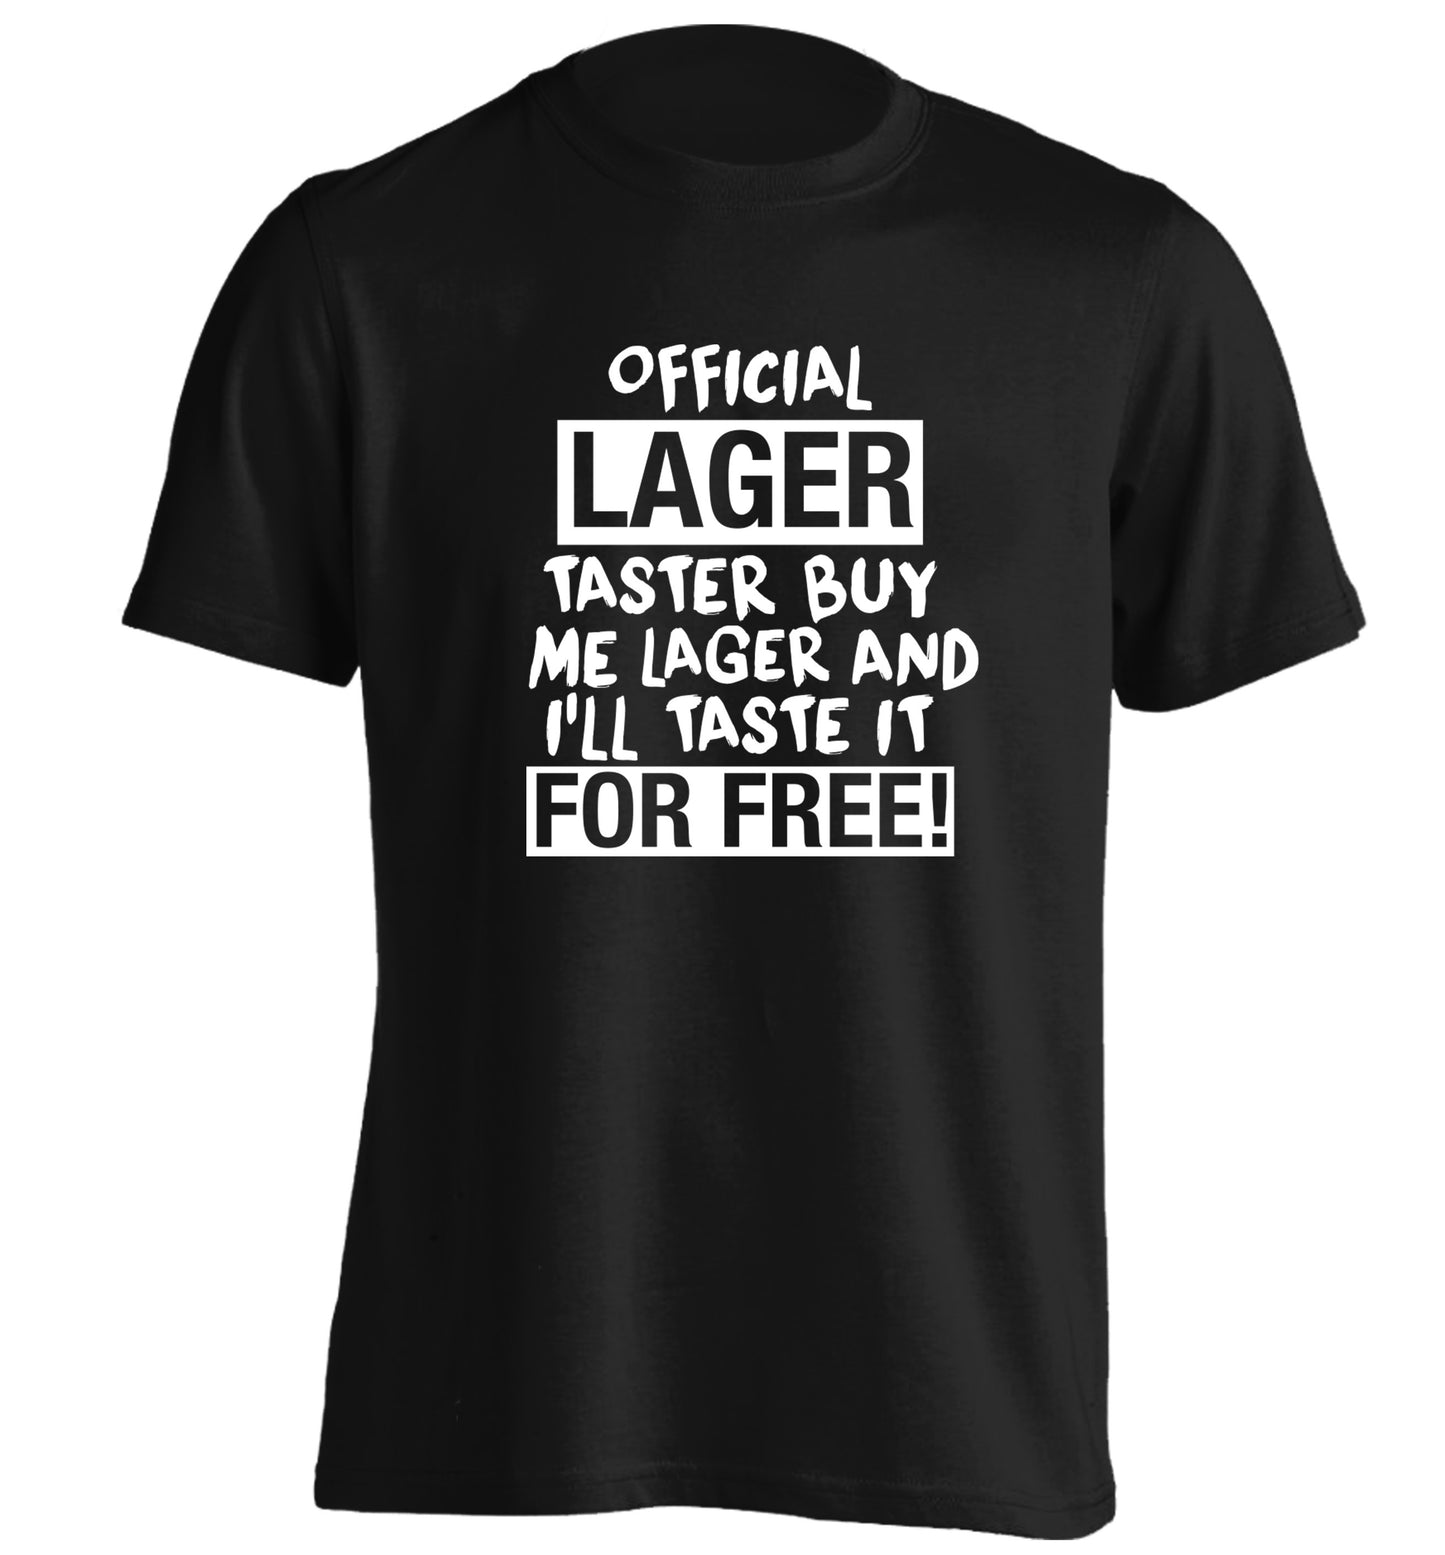 Official lager taster buy me lager and I'll taste it for free! adults unisex black Tshirt 2XL